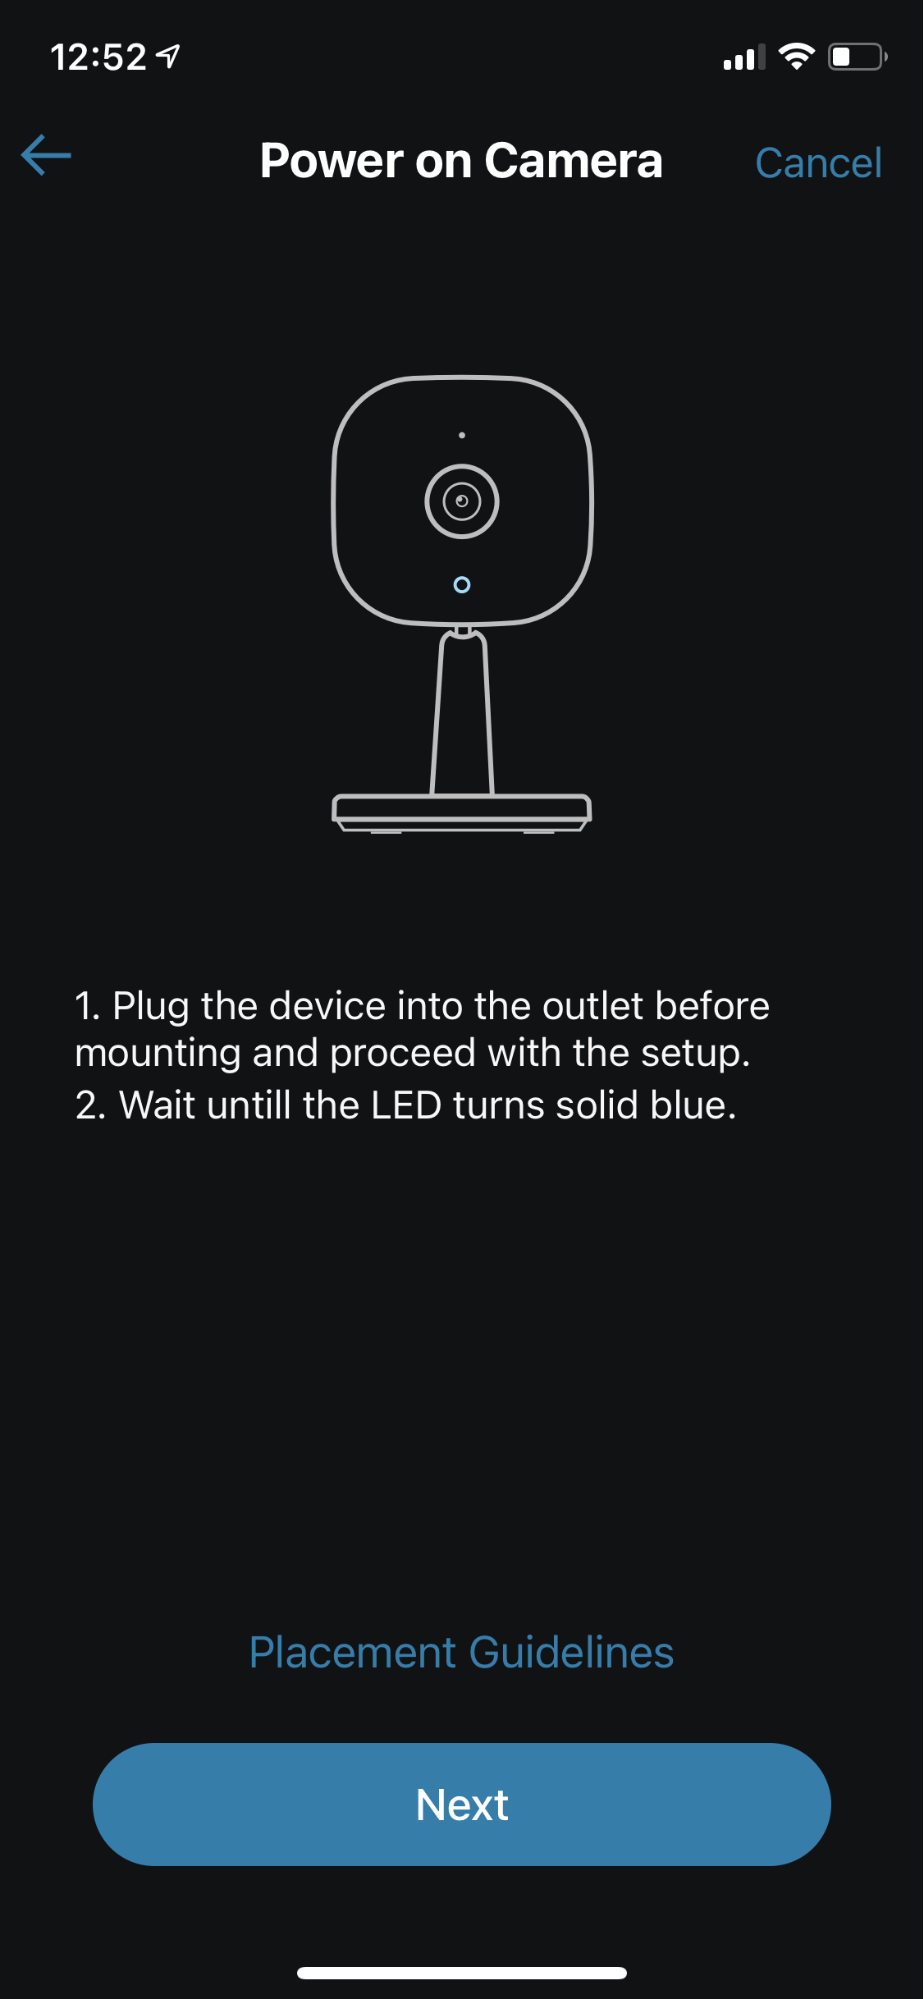 Screenshot from Eufy app showing installation instructions for the Eufy Cam Indoor